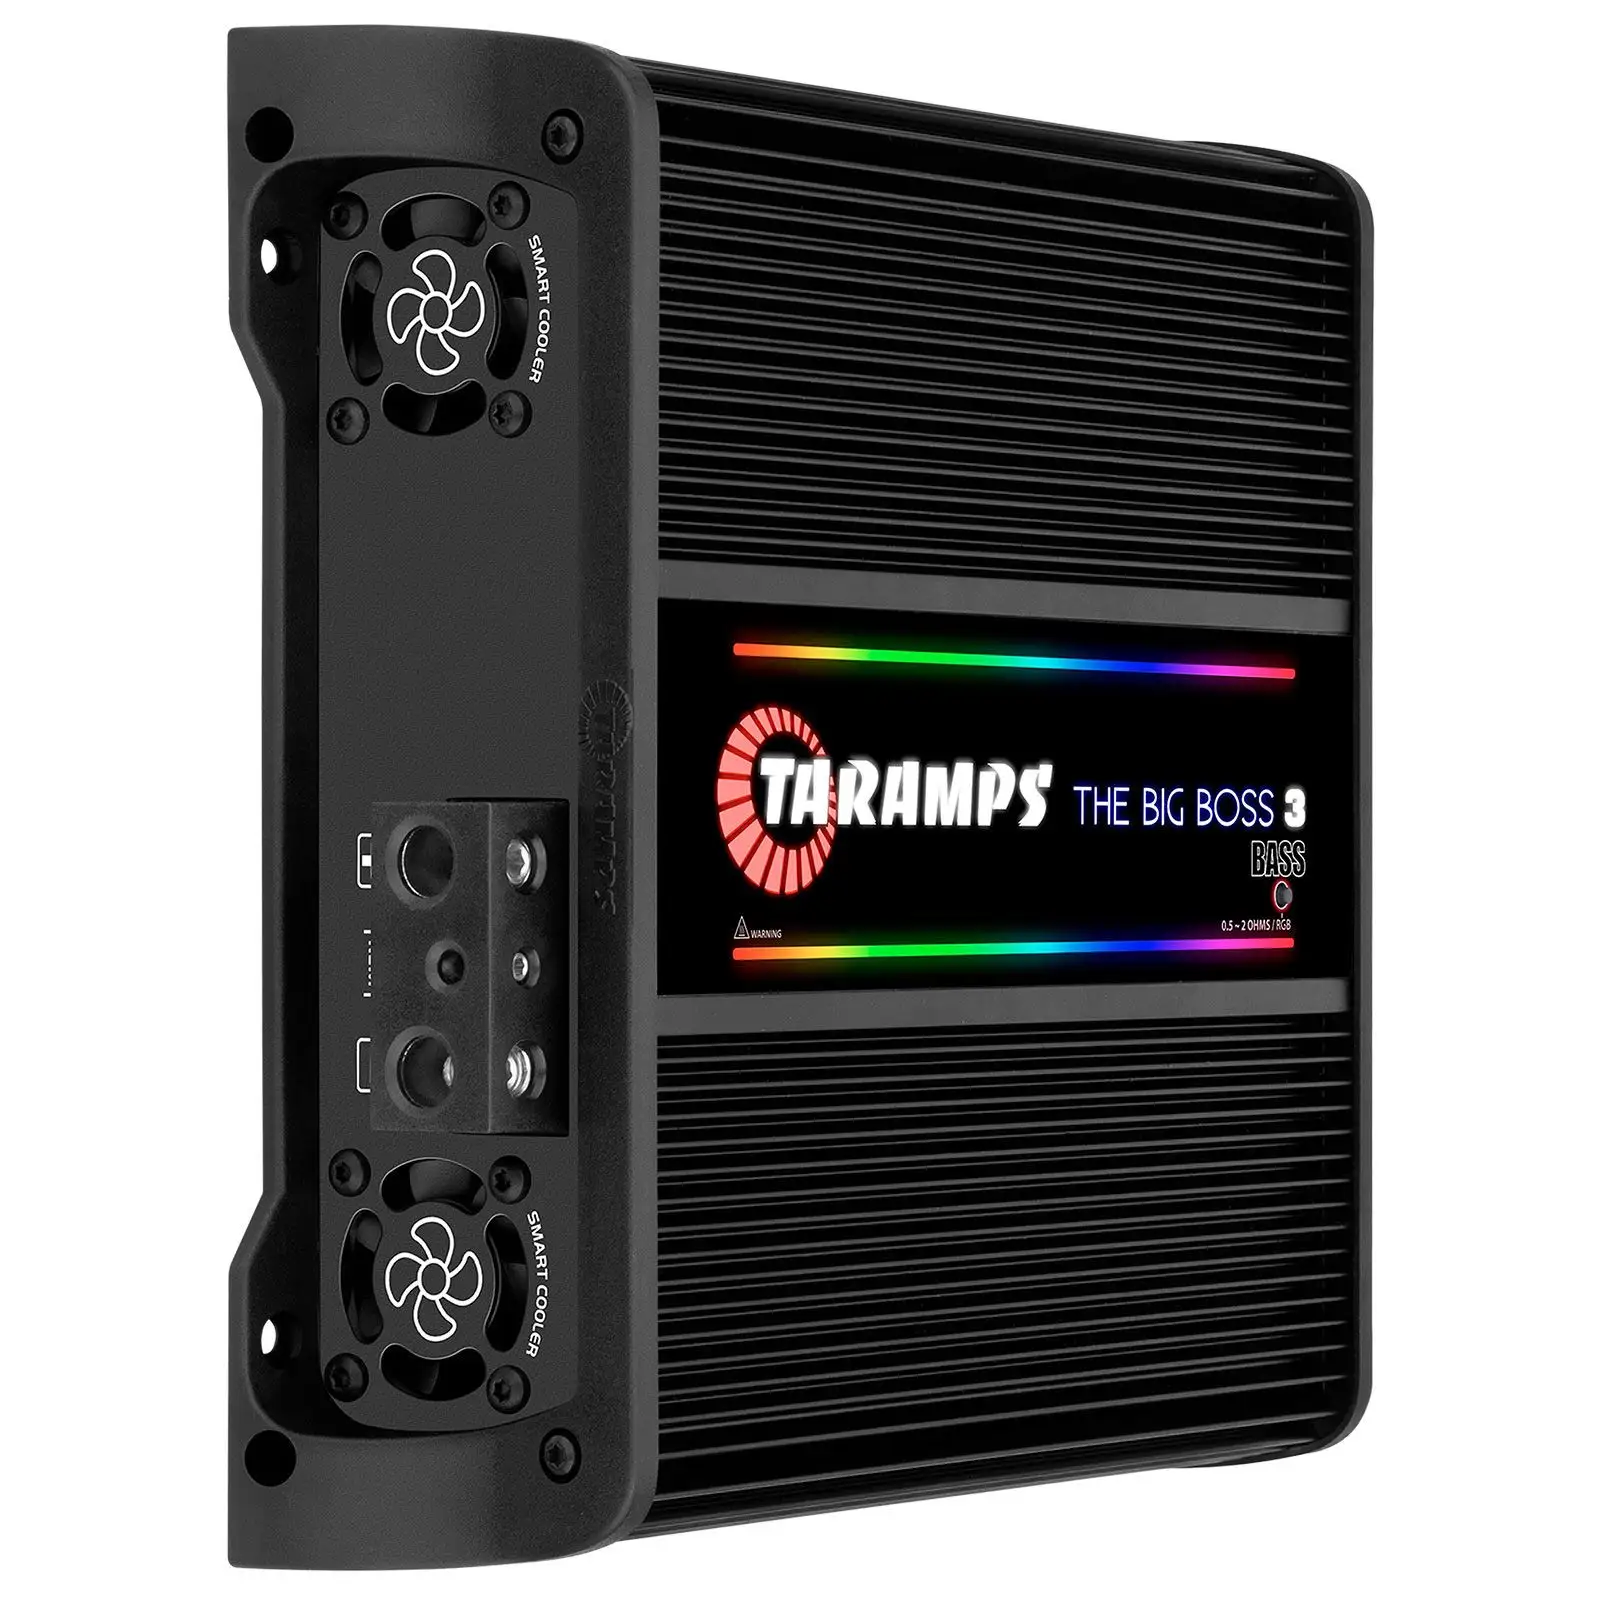 Taramps The Big Boss 3 Bass Black Color Amplifier 0.5 to 2 Ohms 3000 Watts RMS 108 RGB Effects Multi Impedance Class D Car Audio